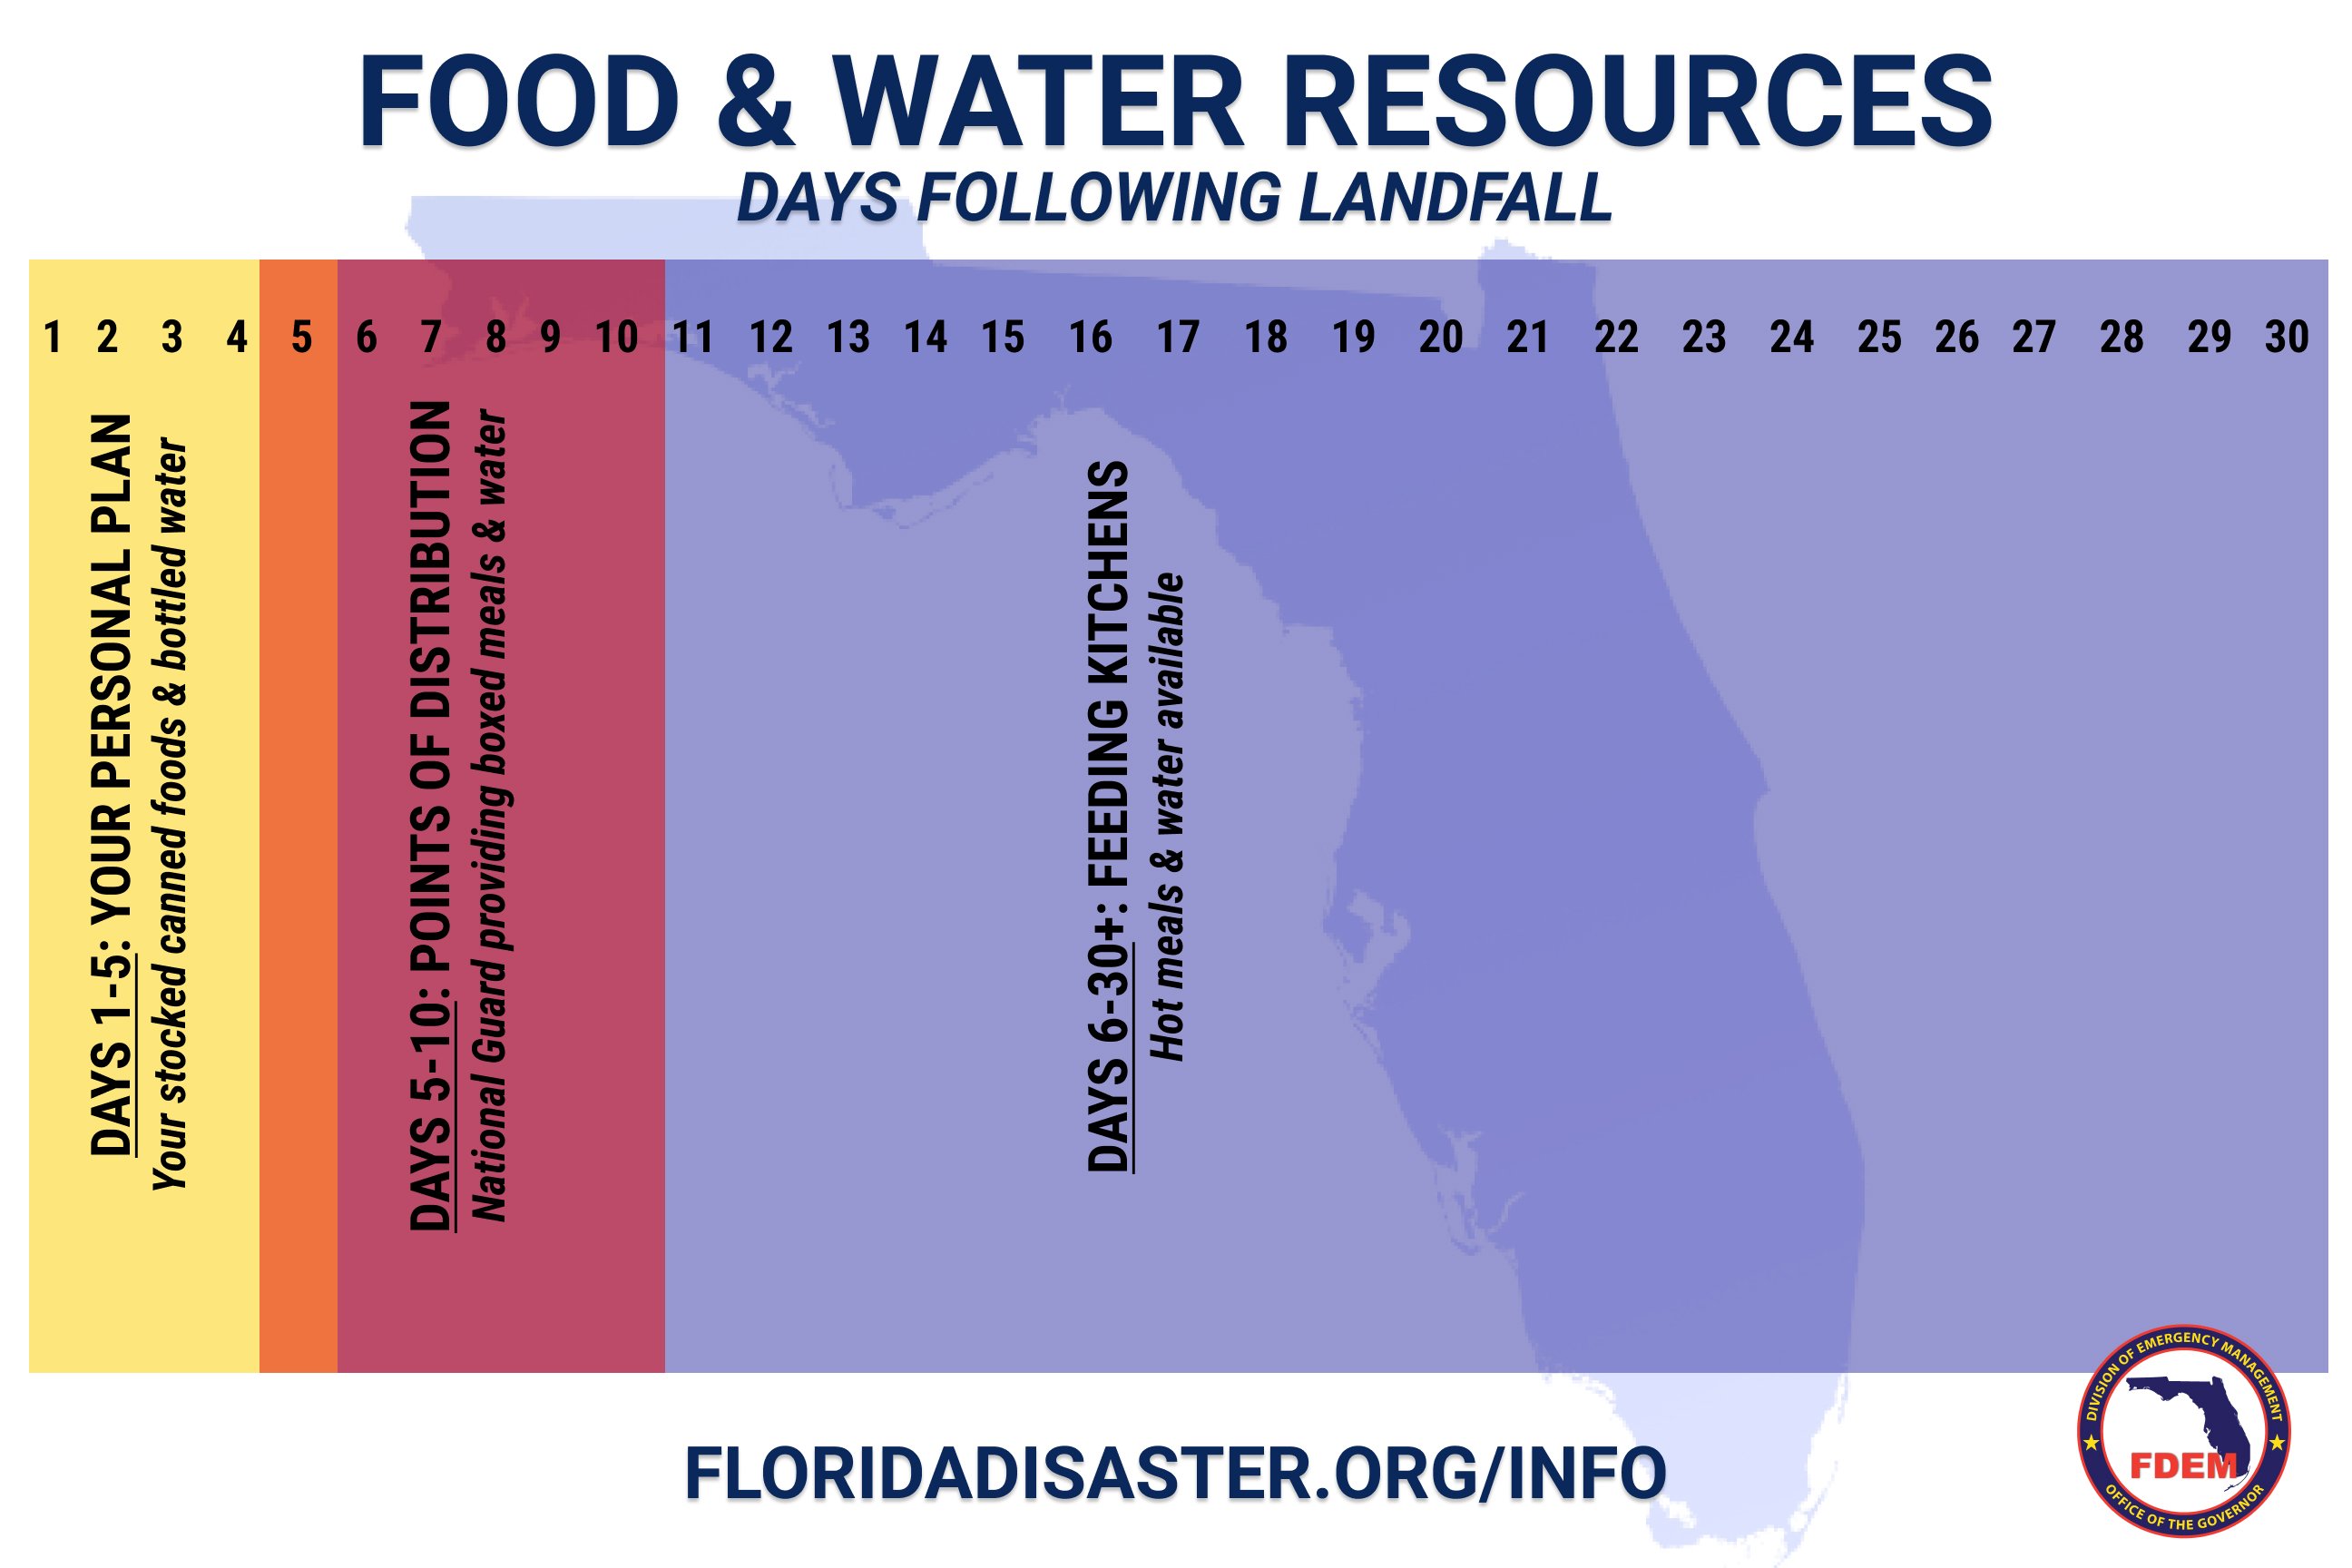 Food and Water Resources Days following Landfall